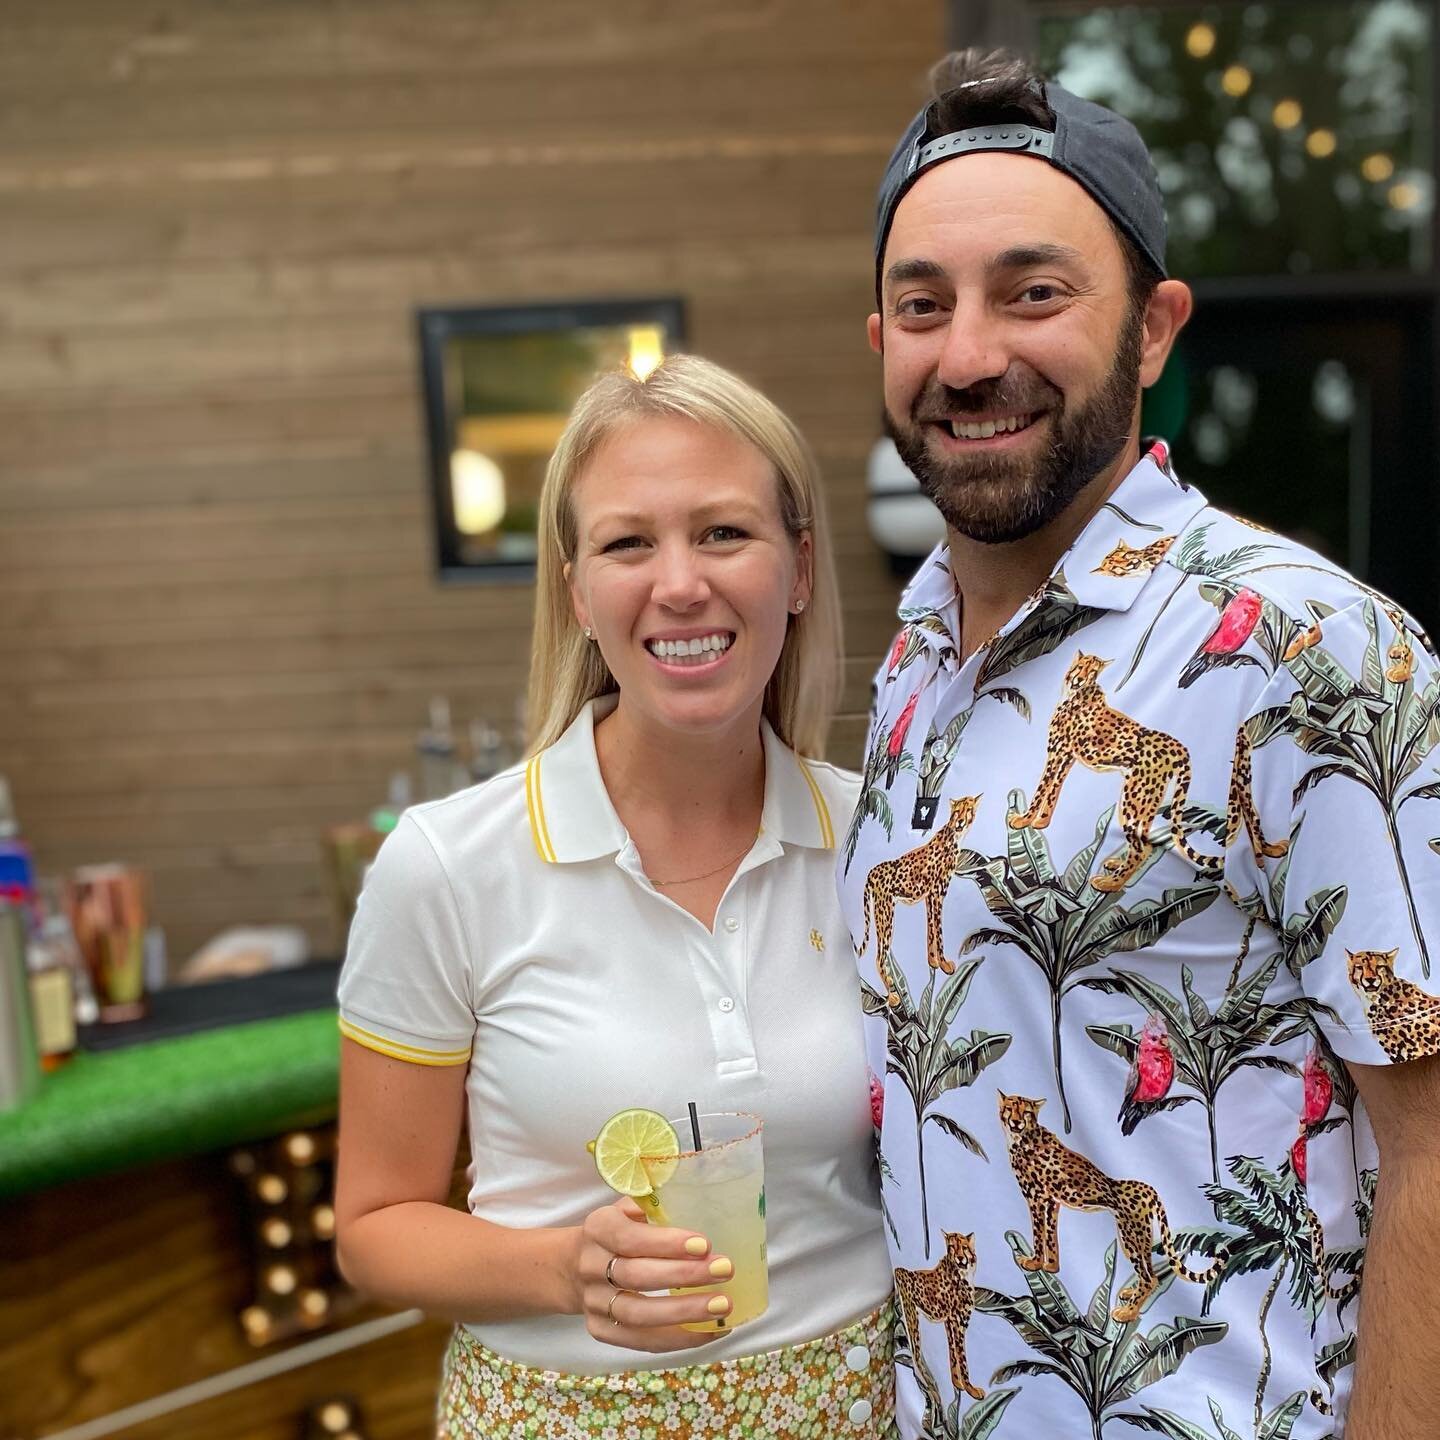 Taking a break from our regular scheduled design programming to say happy birthday to this guy who turned the big 4-0 over the weekend 🥳🥳

A huge shout out to @chelleberkland for making it all happen! Swipe to see a few fun party details ⛳️